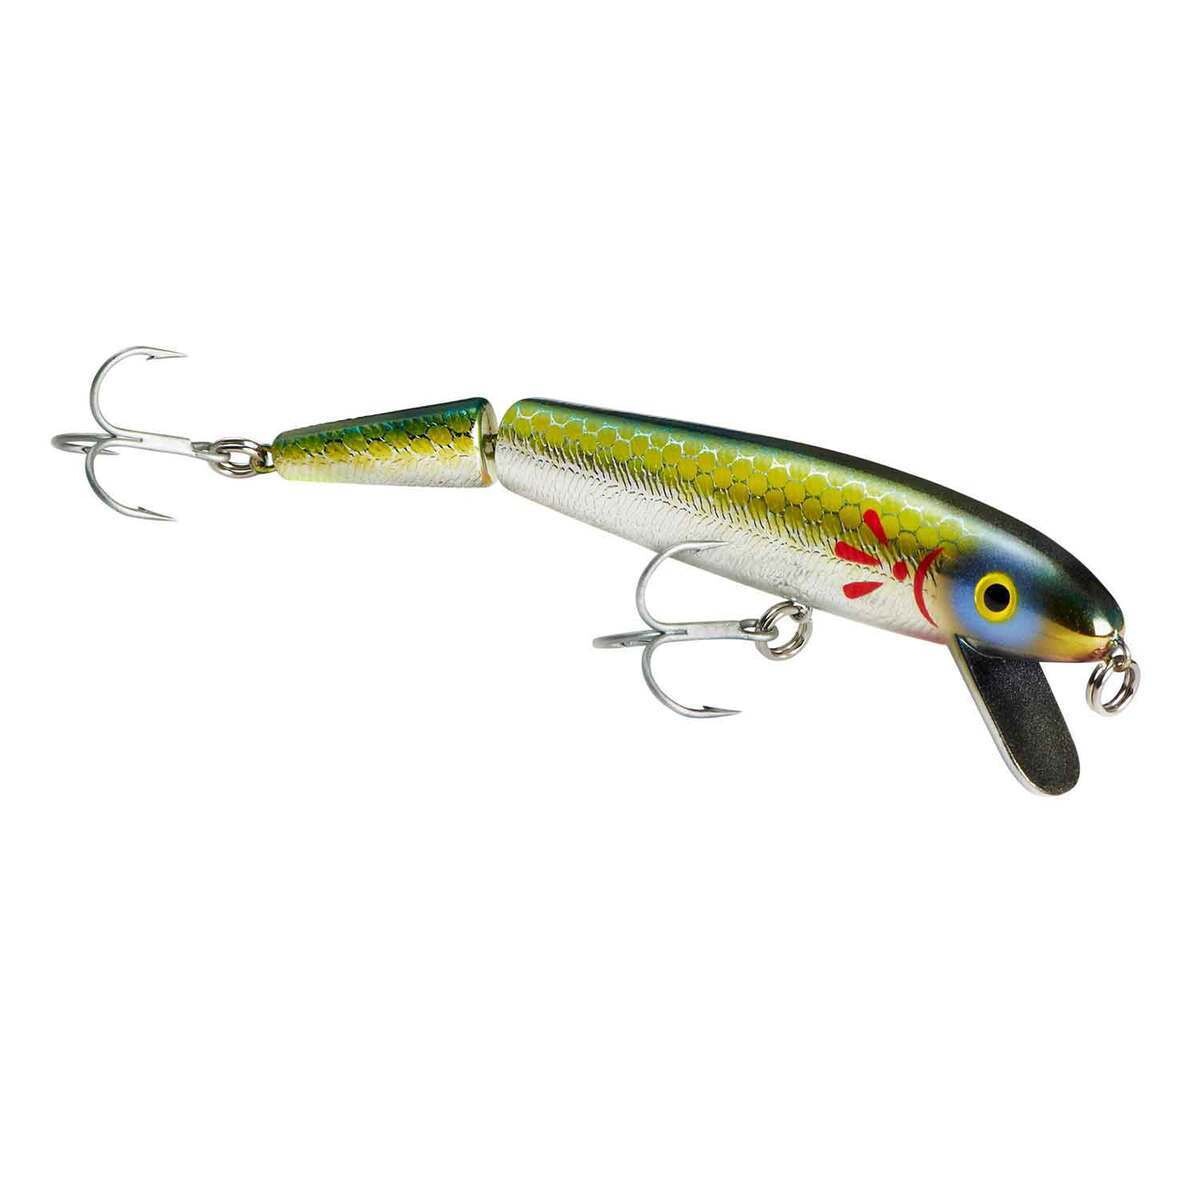 Cotton Cordell CJ9601 Jointed Red Fin, 5", Chrome Herring